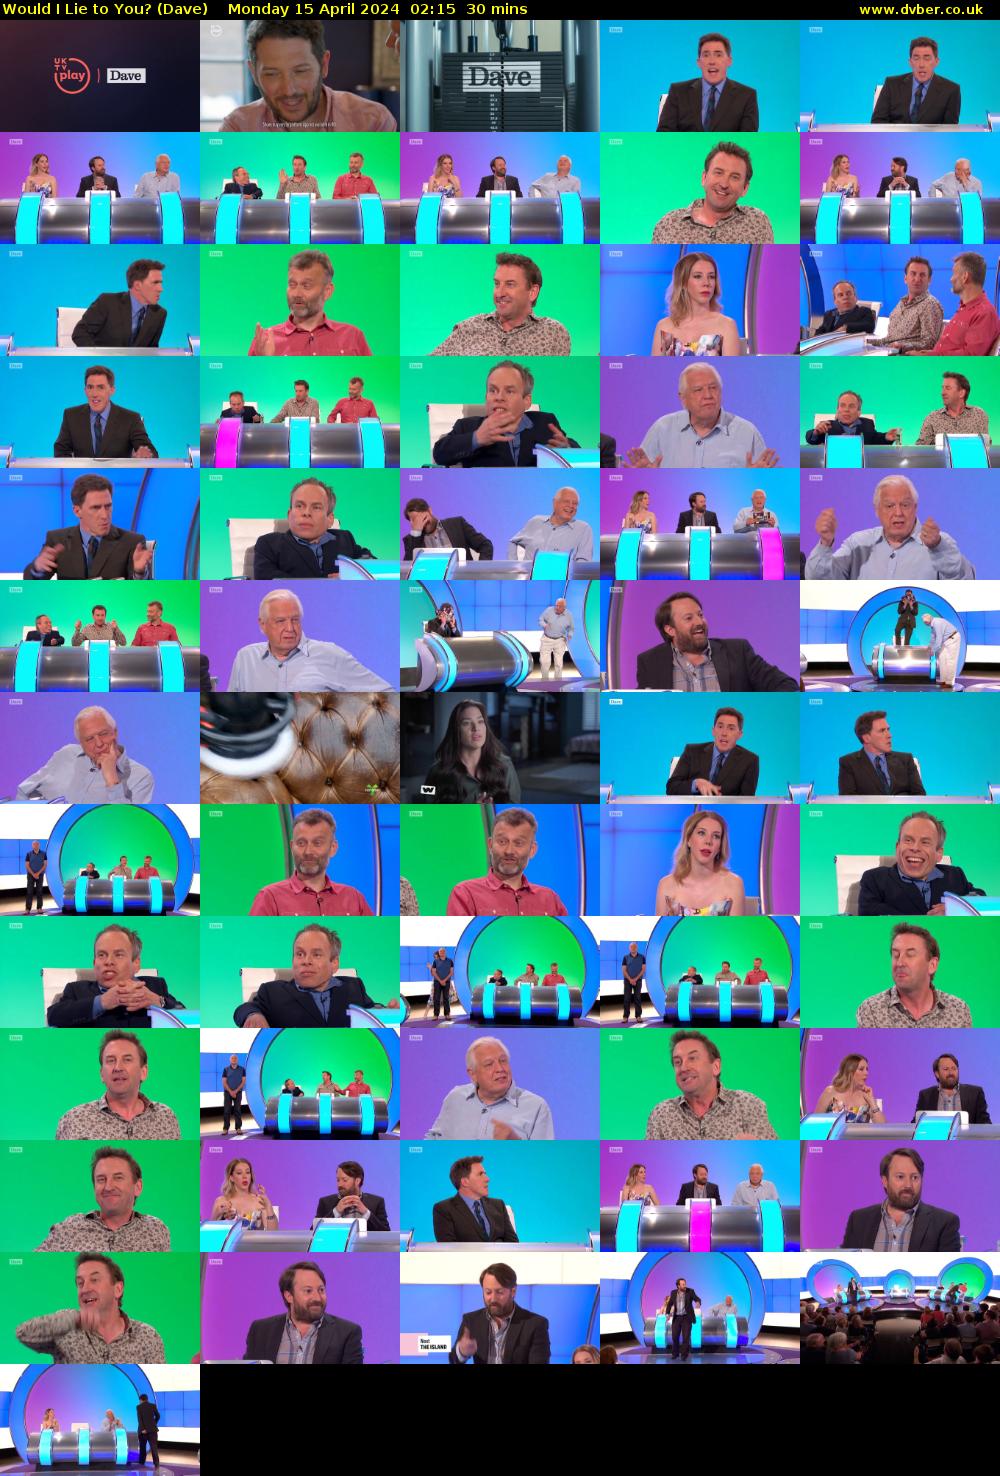 Would I Lie to You? (Dave) Monday 15 April 2024 02:15 - 02:45